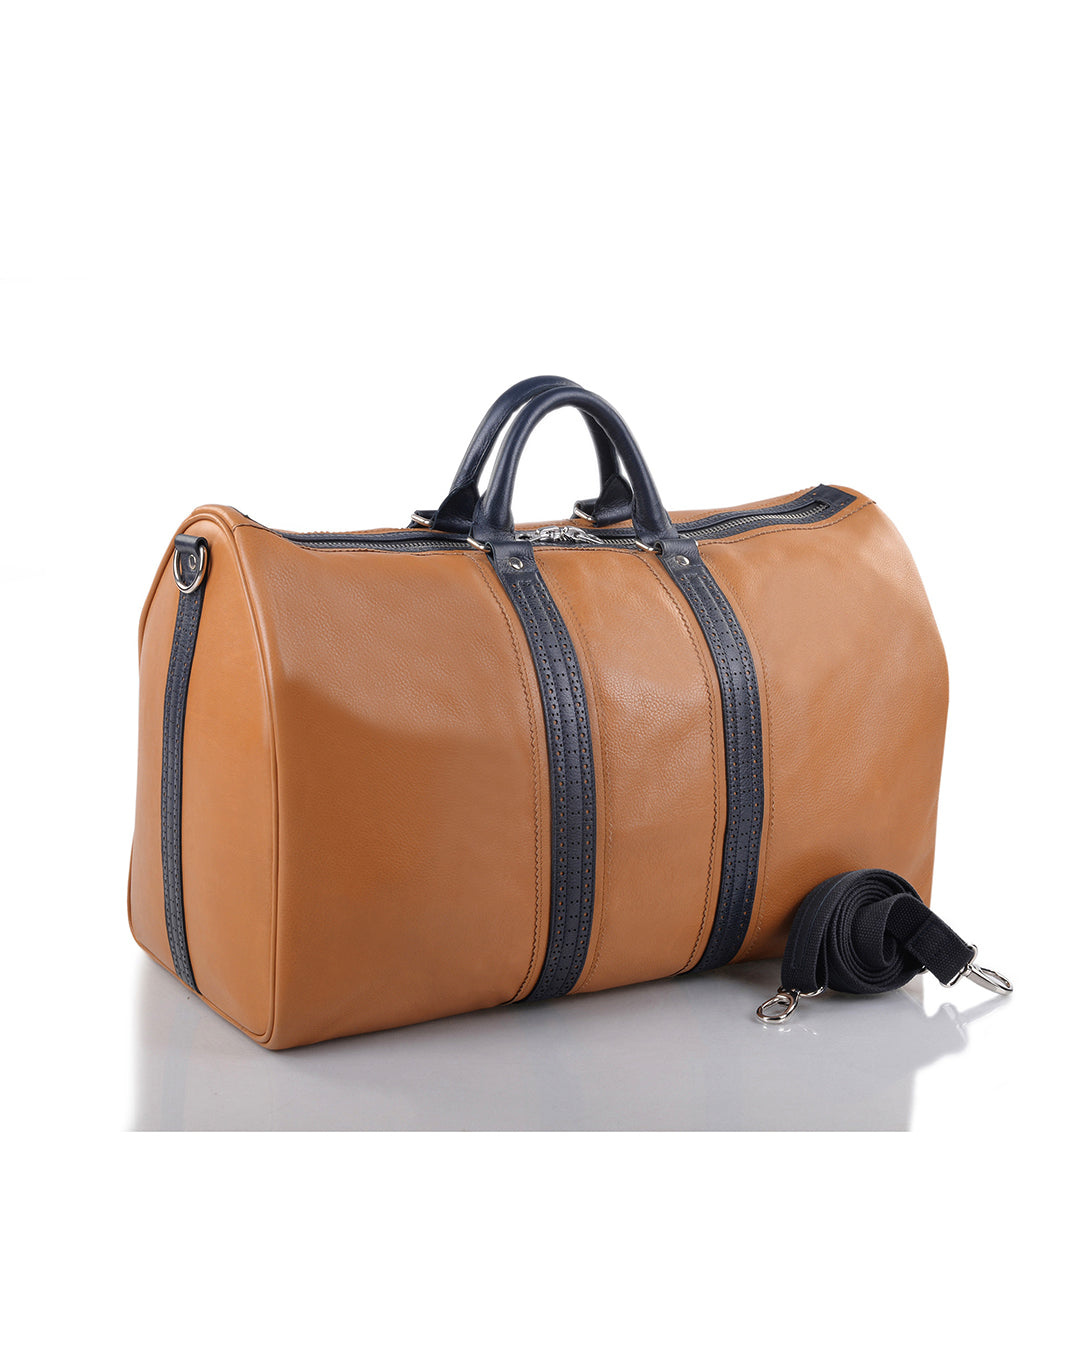 Leather Holdall Bag in Tan with Navy trim